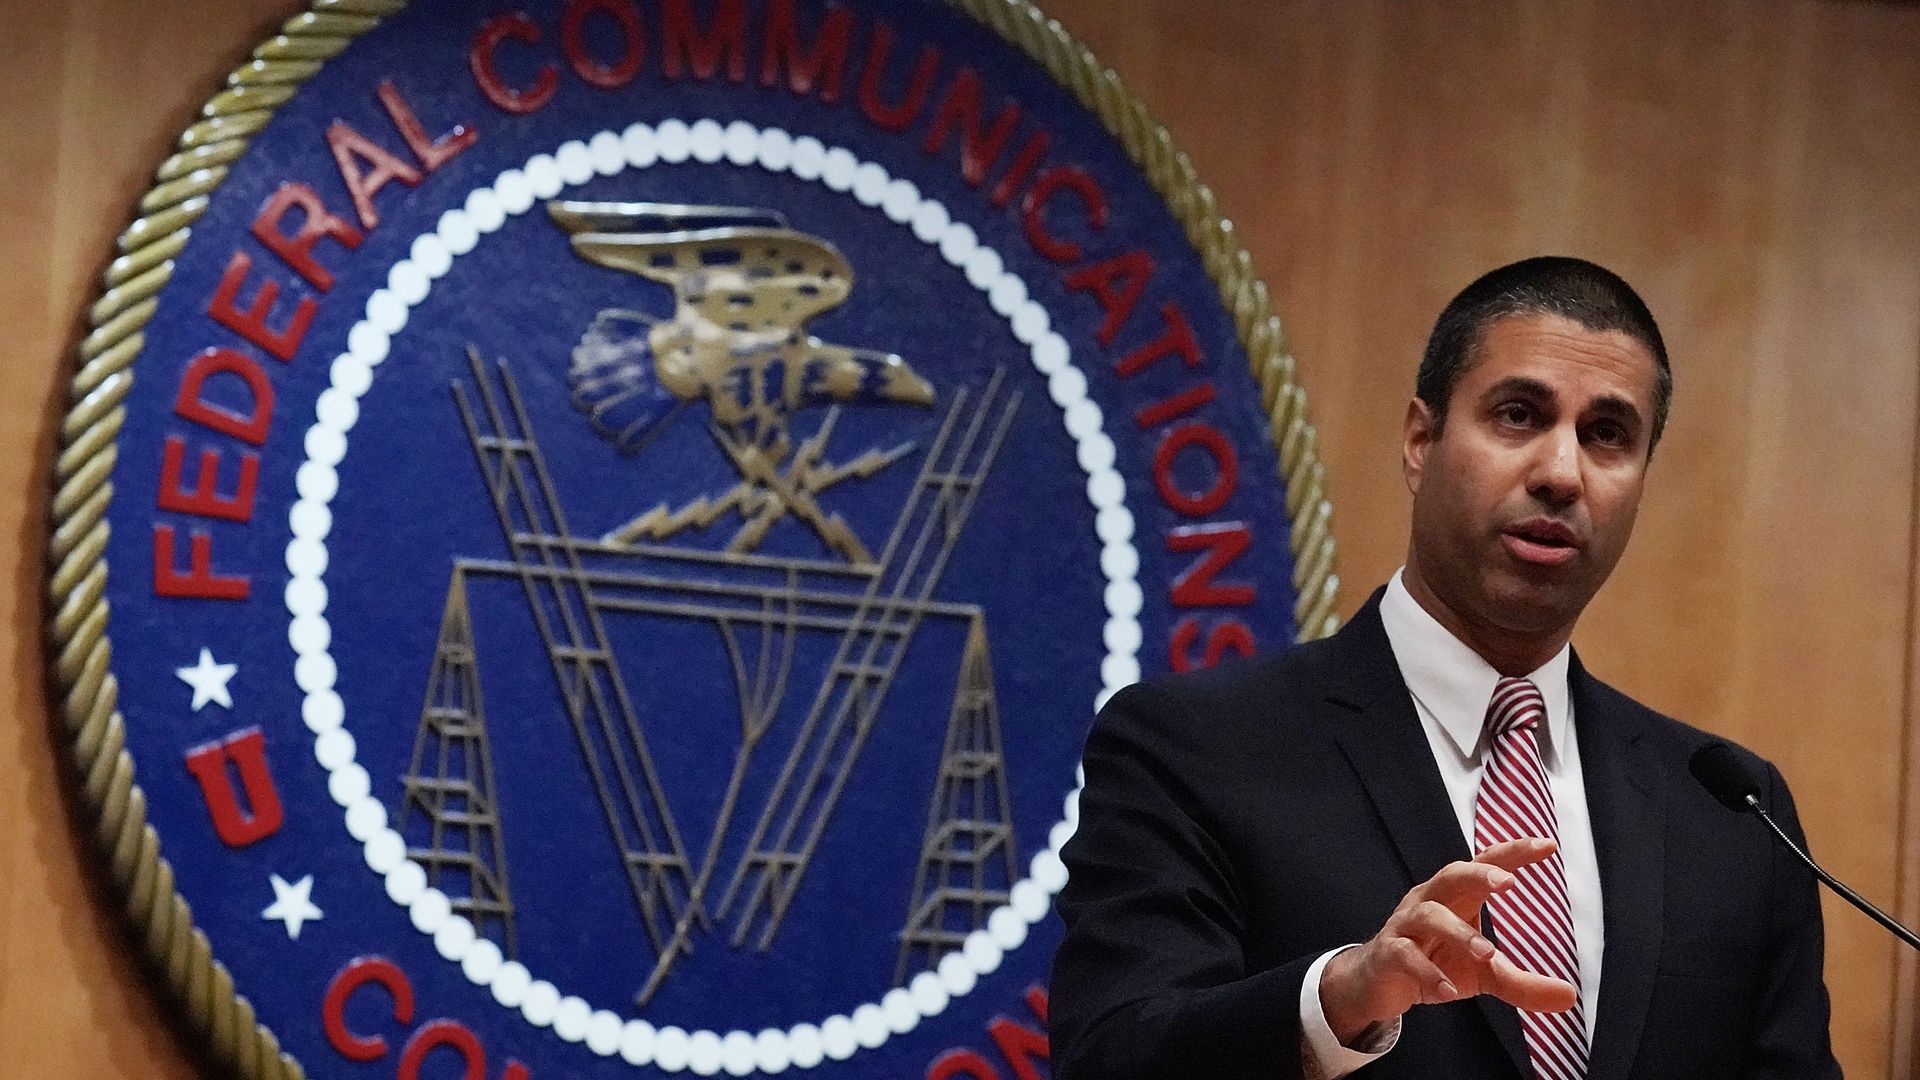 A photo of FCC Chairman Ajit Pai standing and speaking in front of the FCC logo.